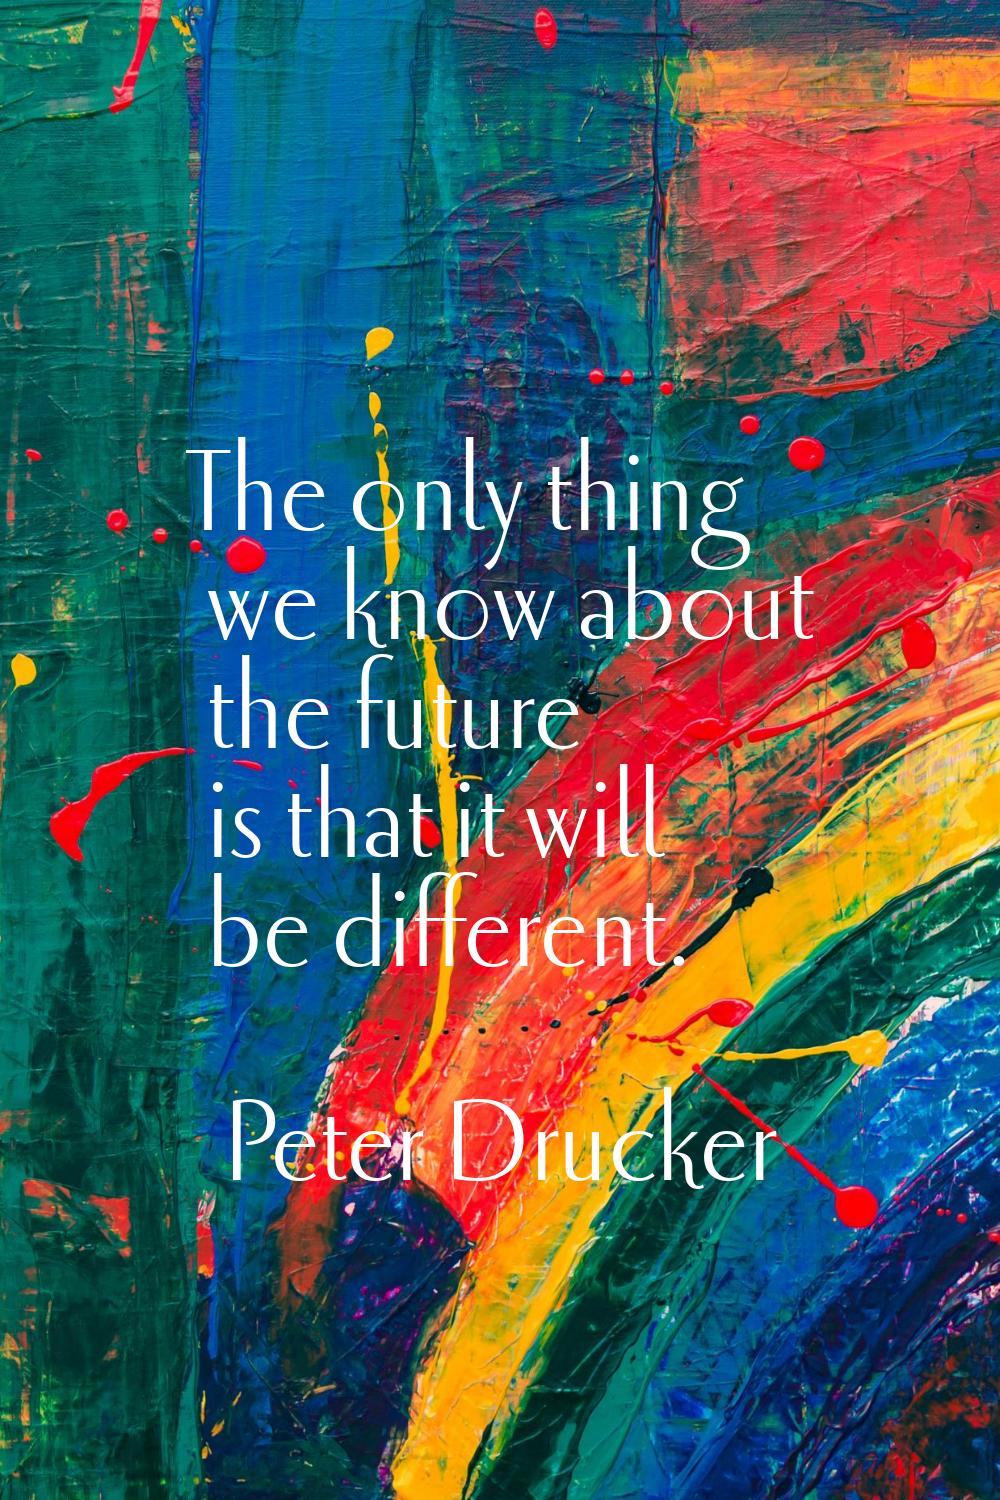 The only thing we know about the future is that it will be different.